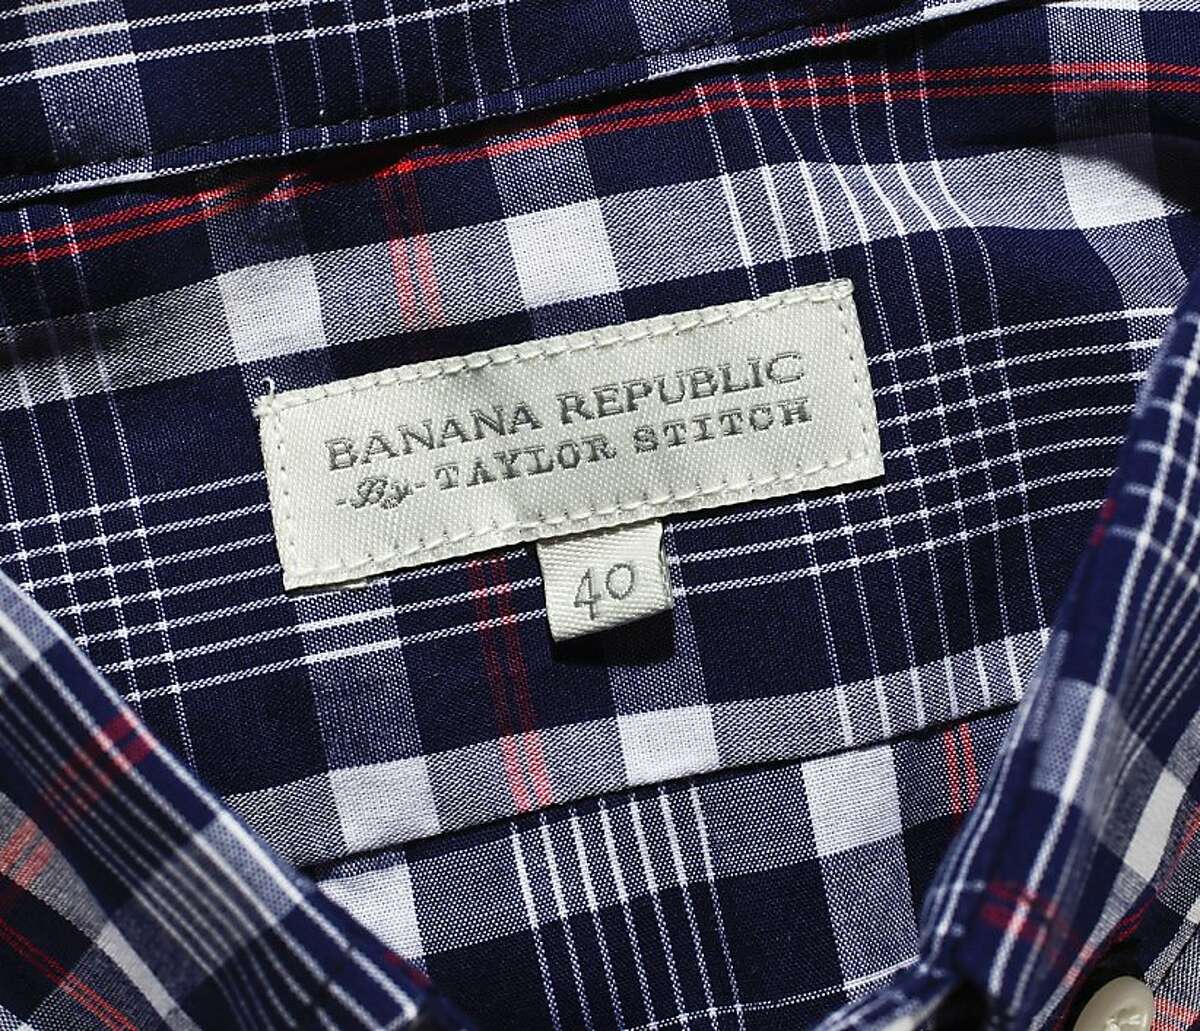 Banana Republic is teaming with Taylor Stitch to provide shirts that will be sold exclusively at the Banana Republic Grant Ave. store in San Francisco, Calif.